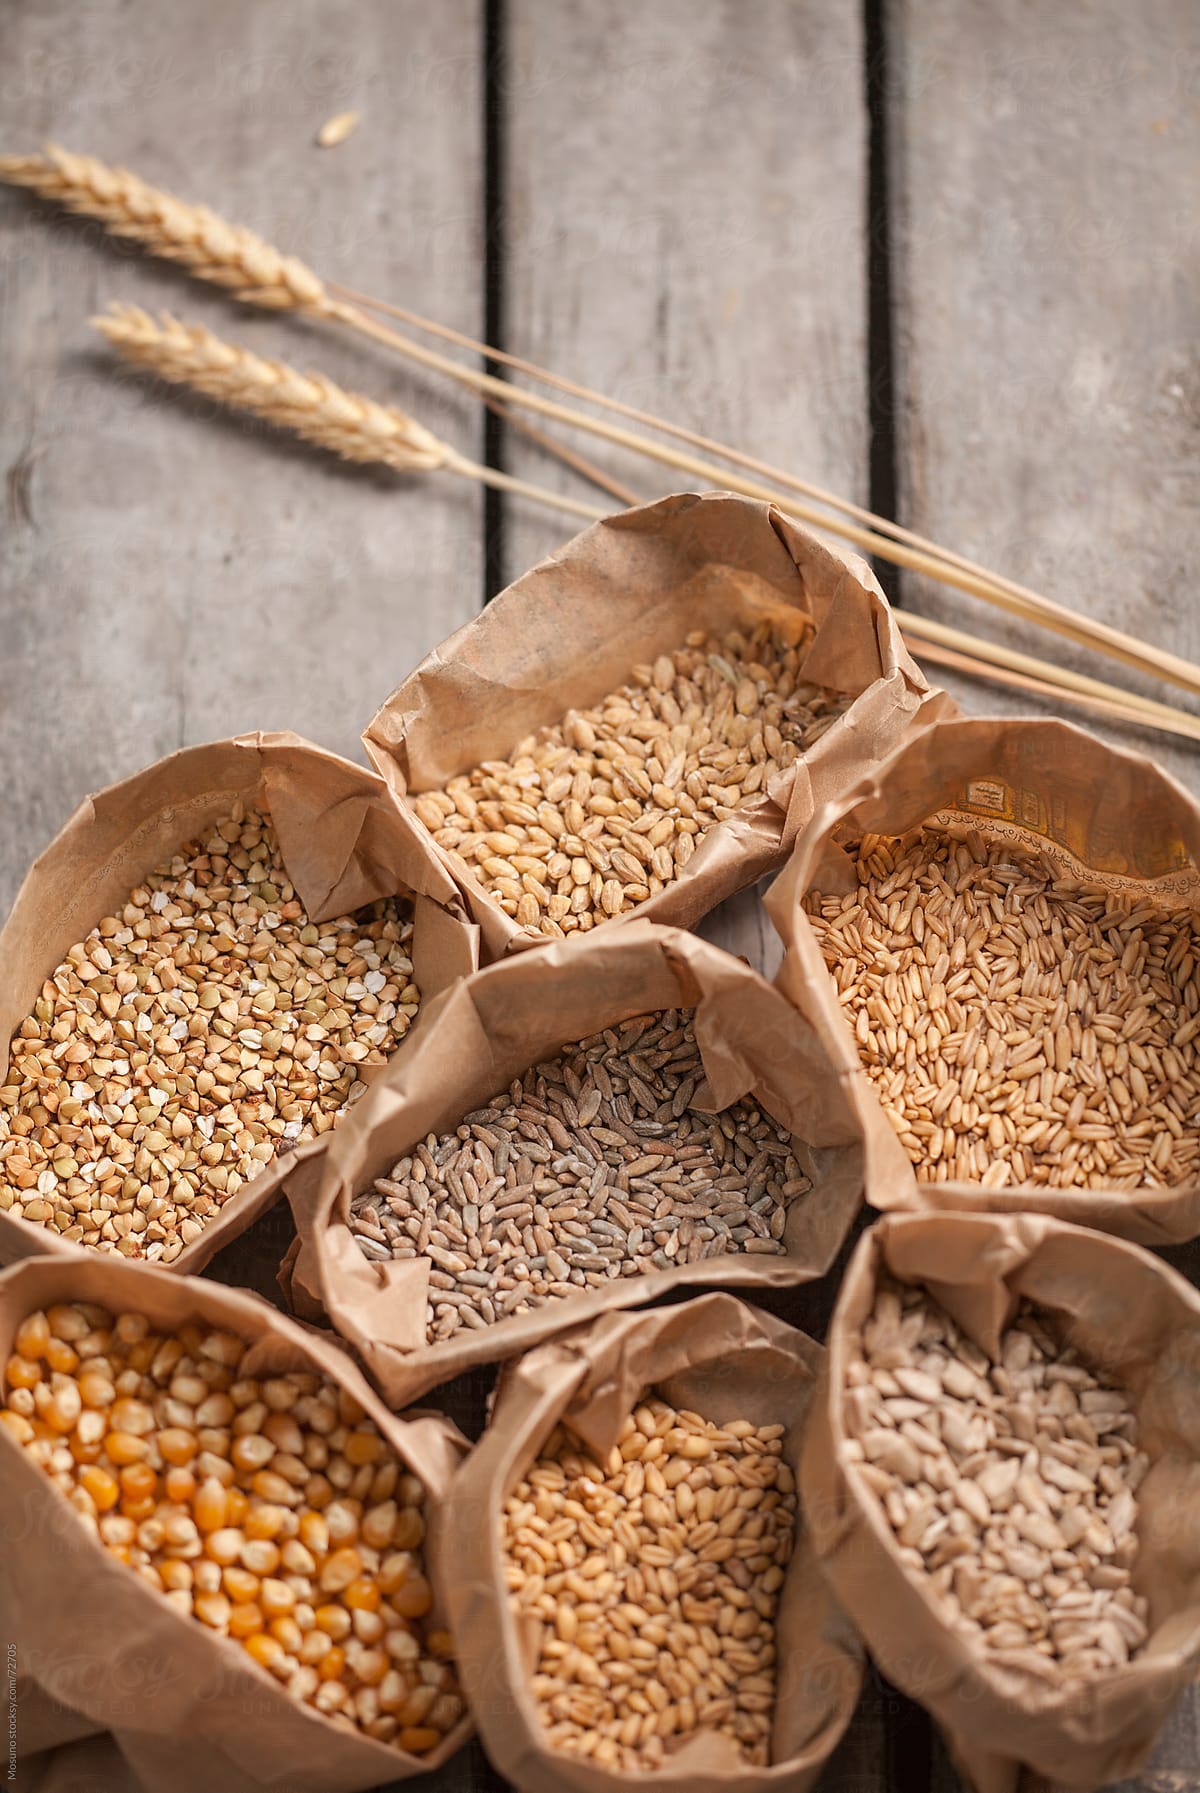 Different Types of Grains in Paper Bags